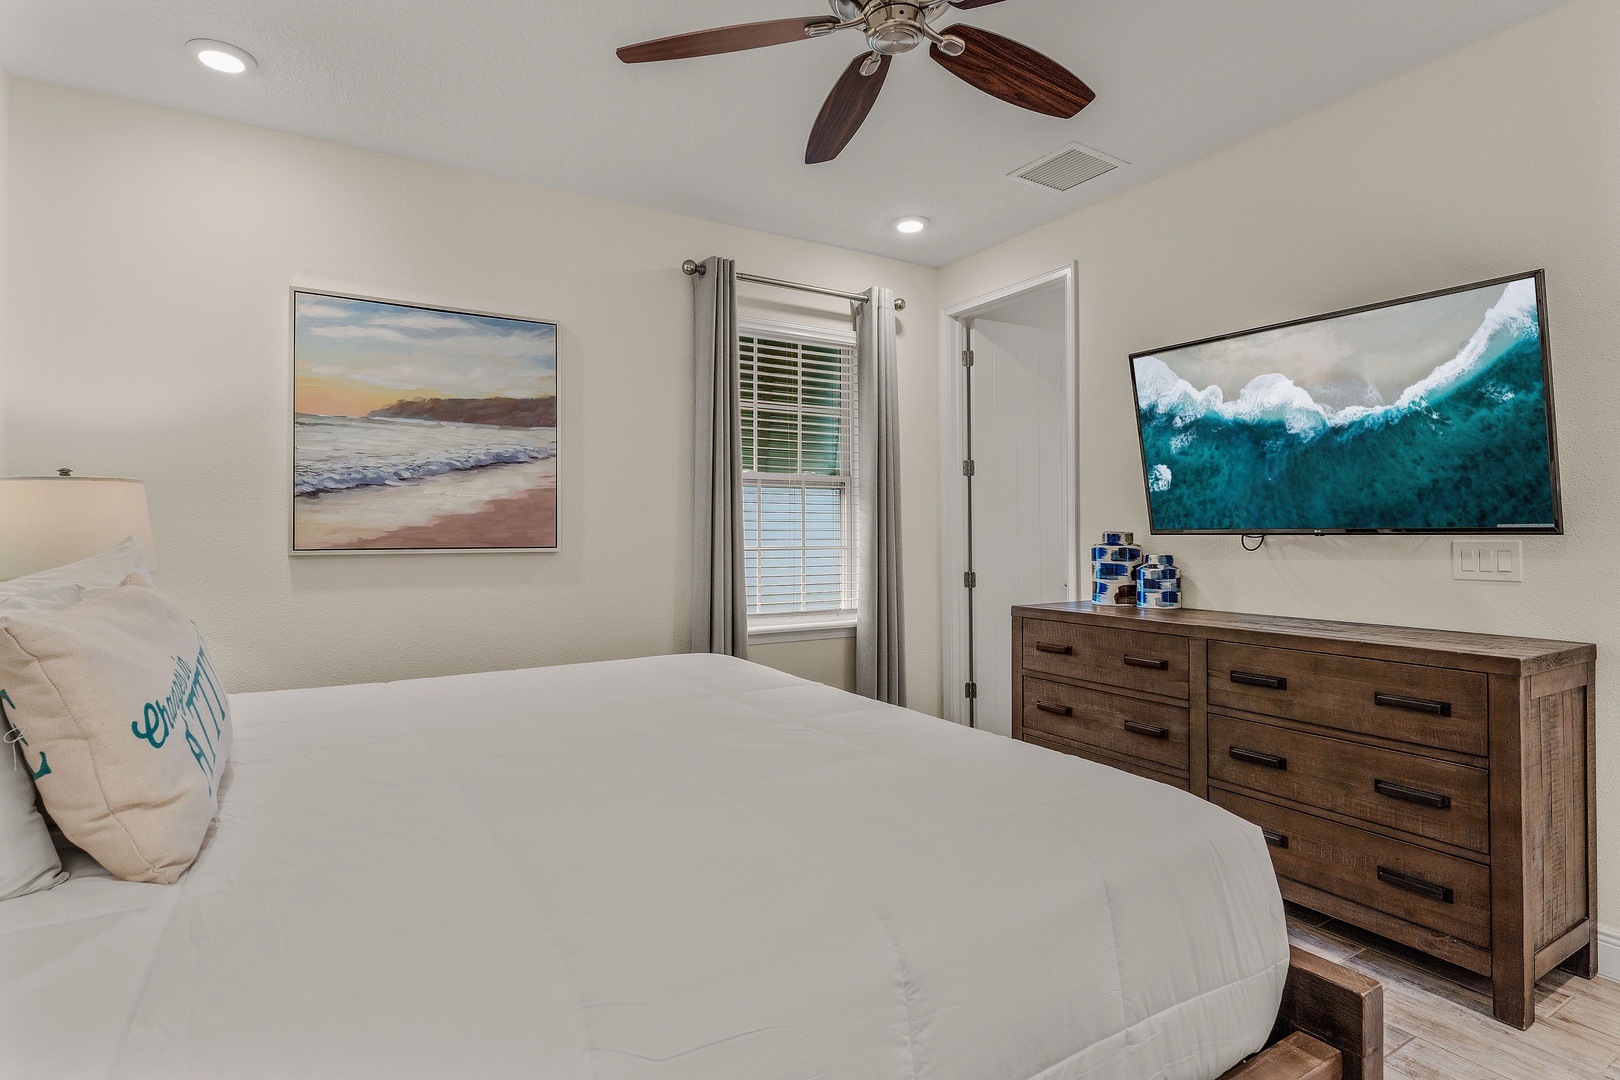 The final 3rd floor suite features a king bed, private ensuite, & Smart TV